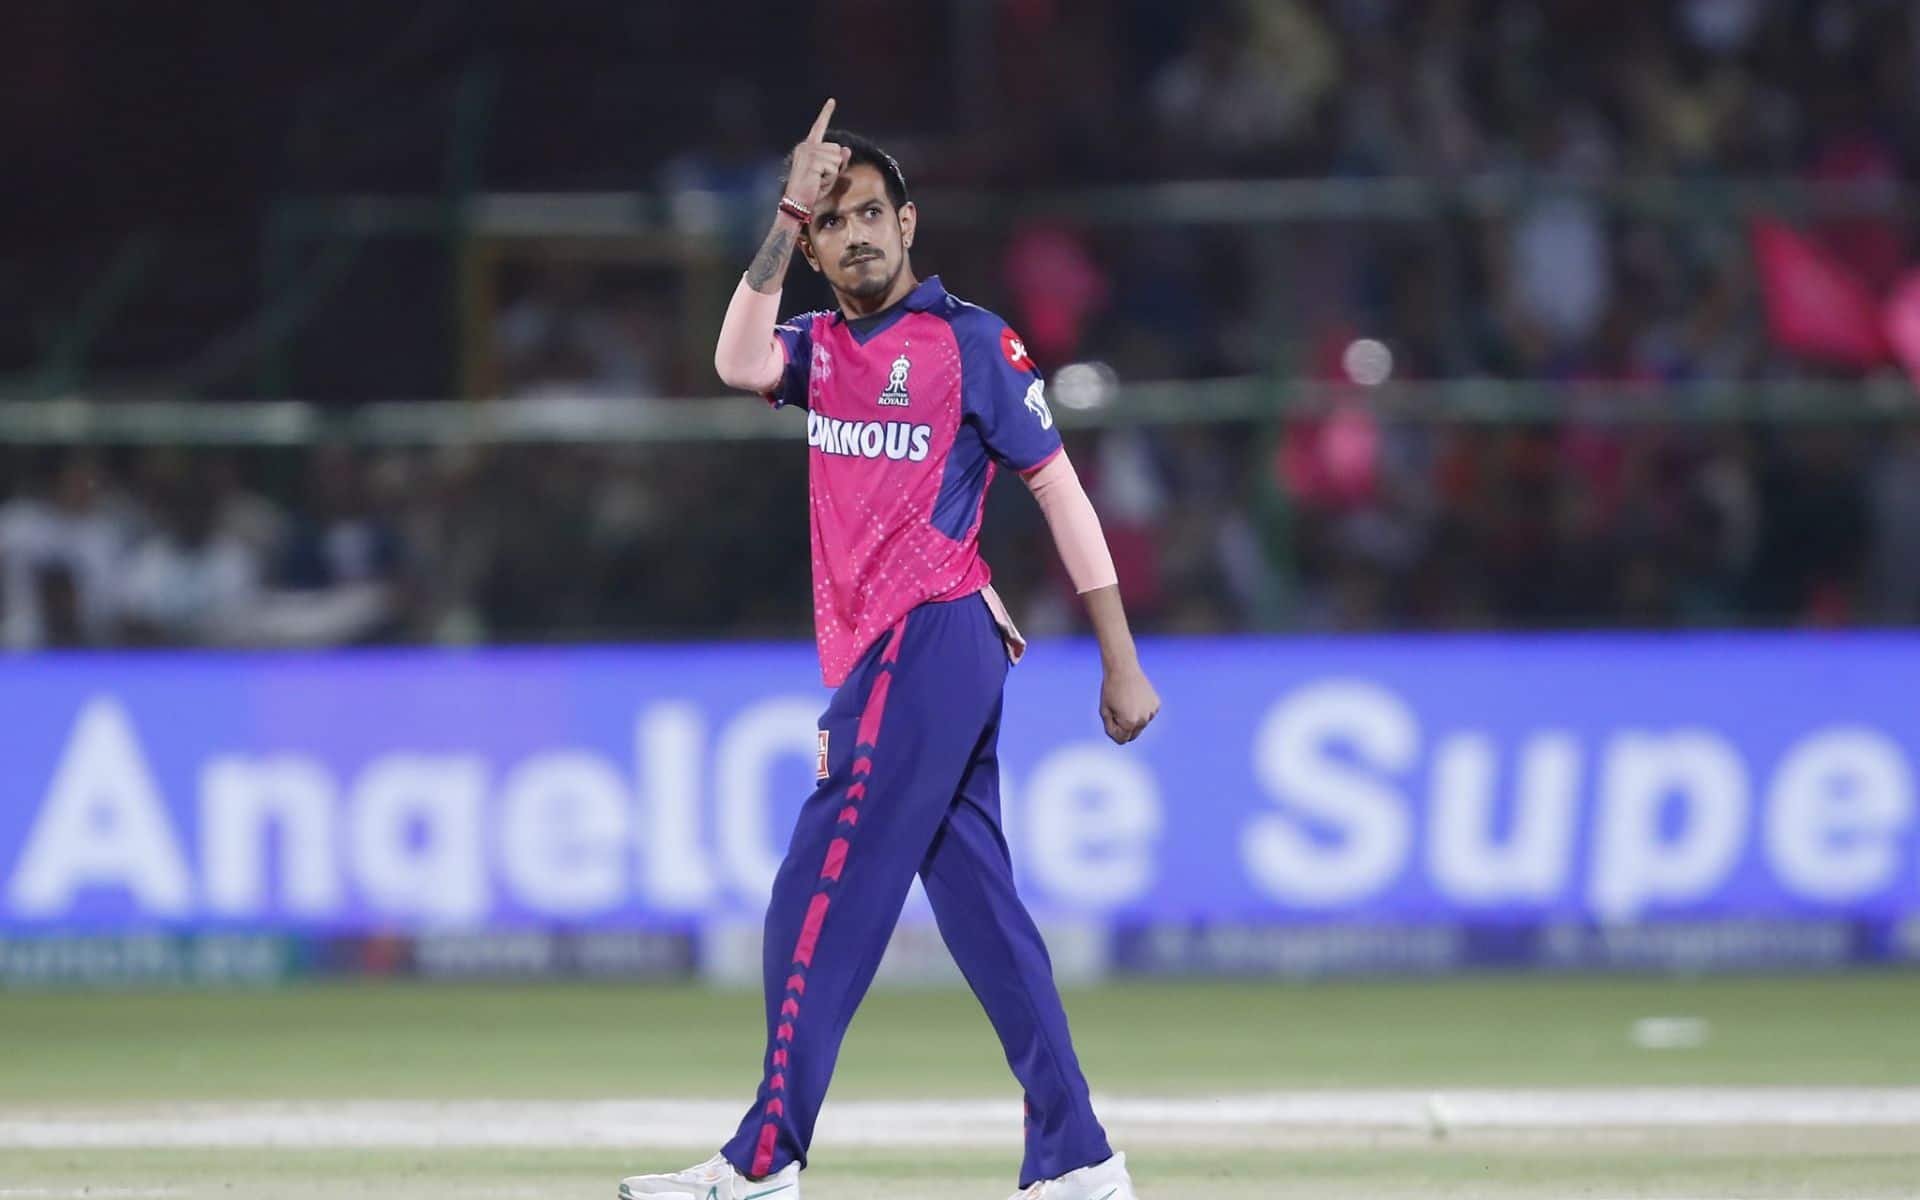 Chahal has conceded 200 sixes in the history of IPL (X.com)